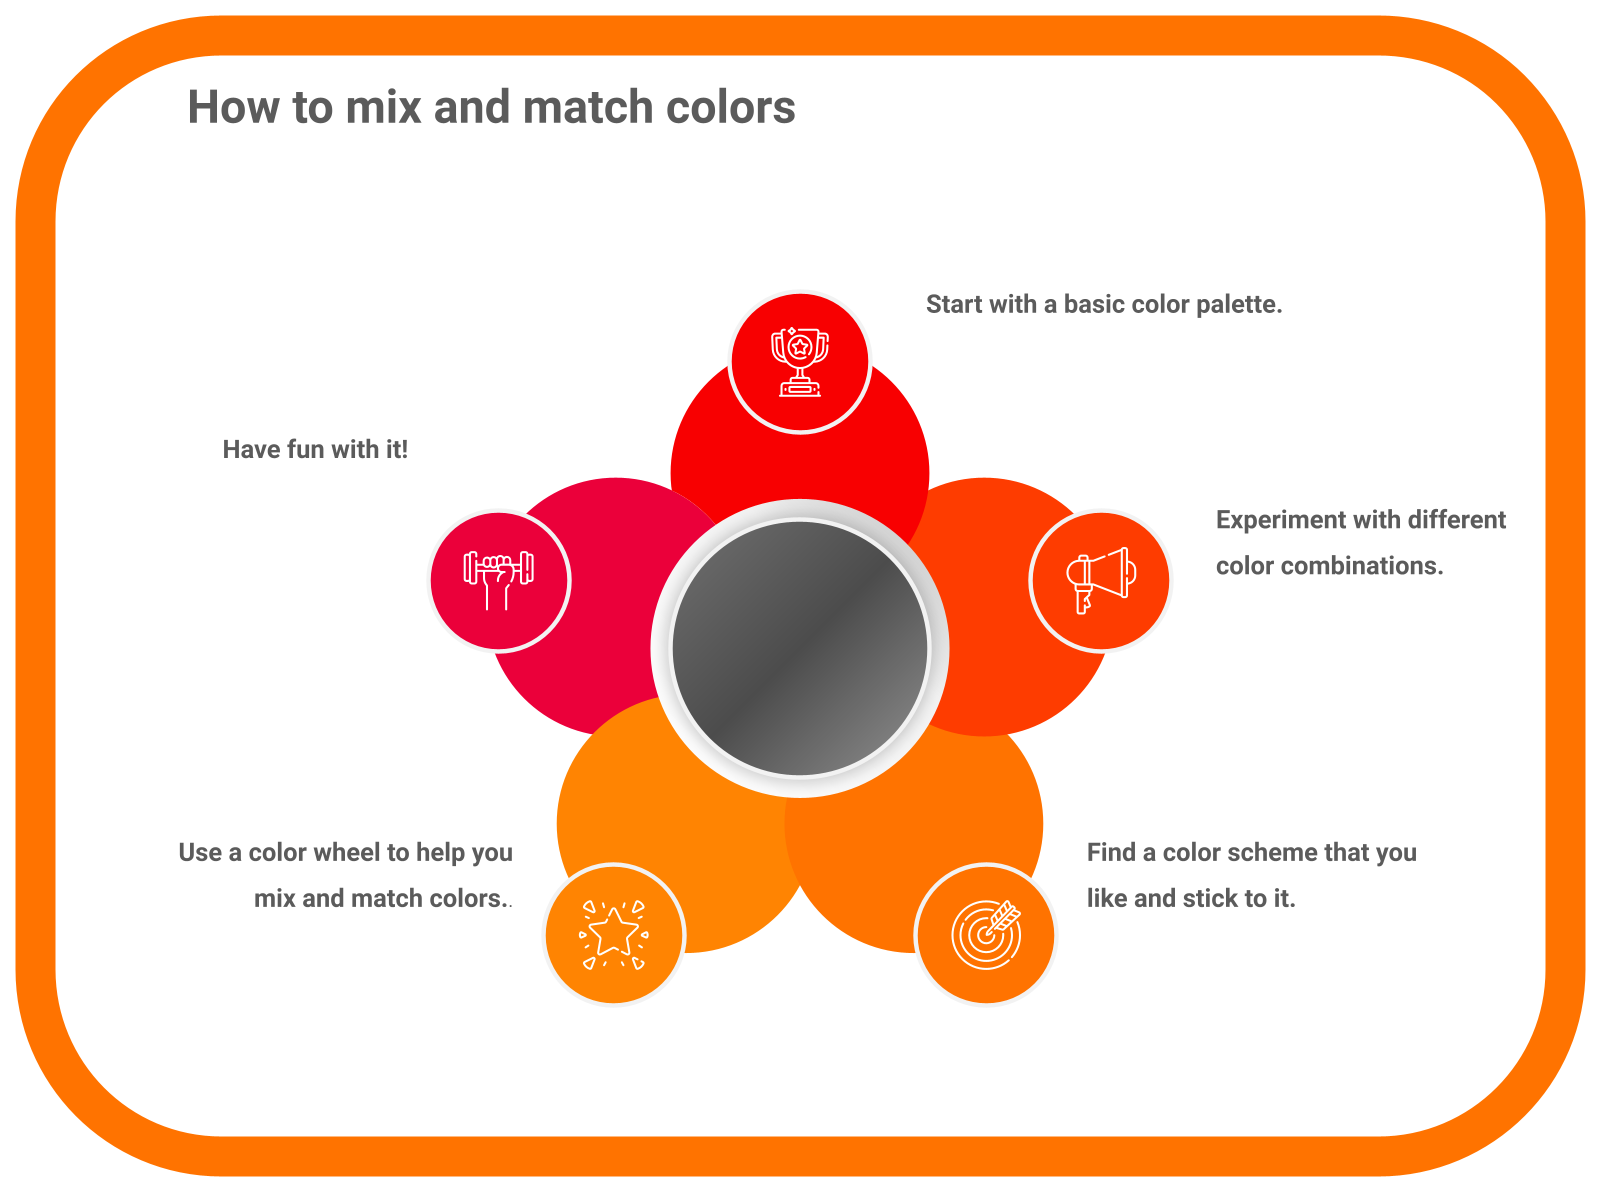 How to mix and match colors